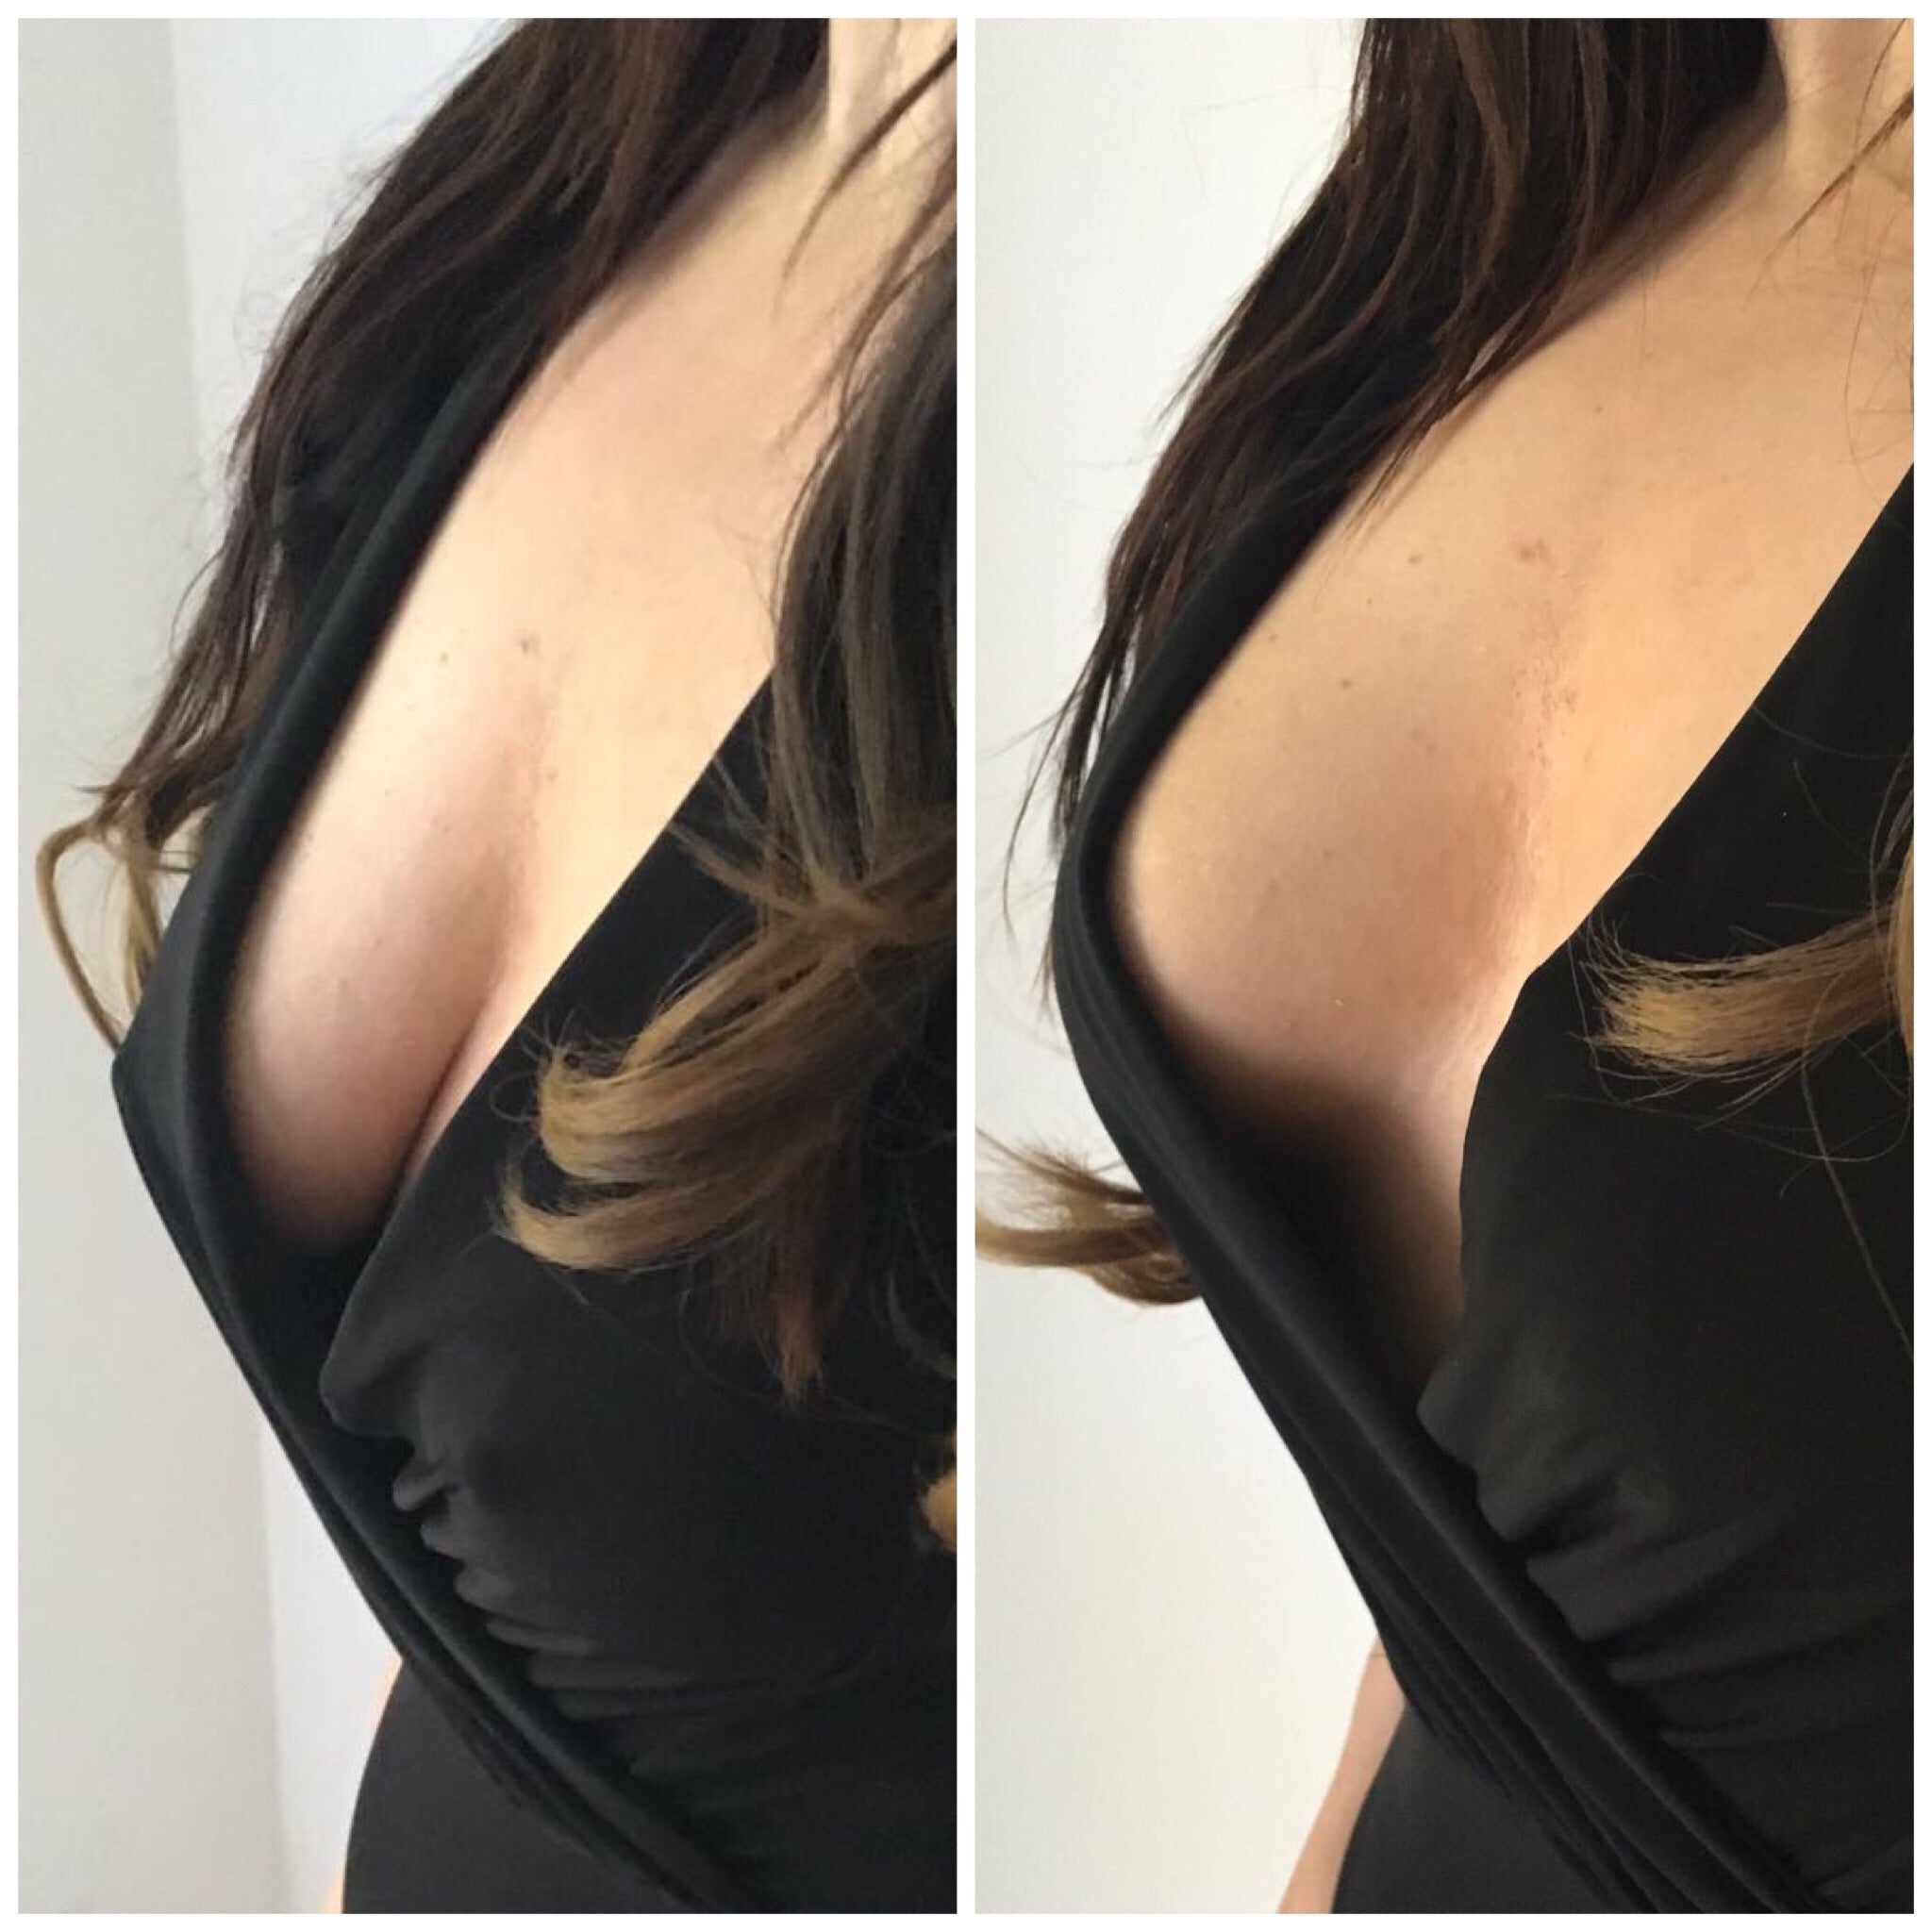 Perky Pear breast lift & shape tape- Why we're the best boob tape!